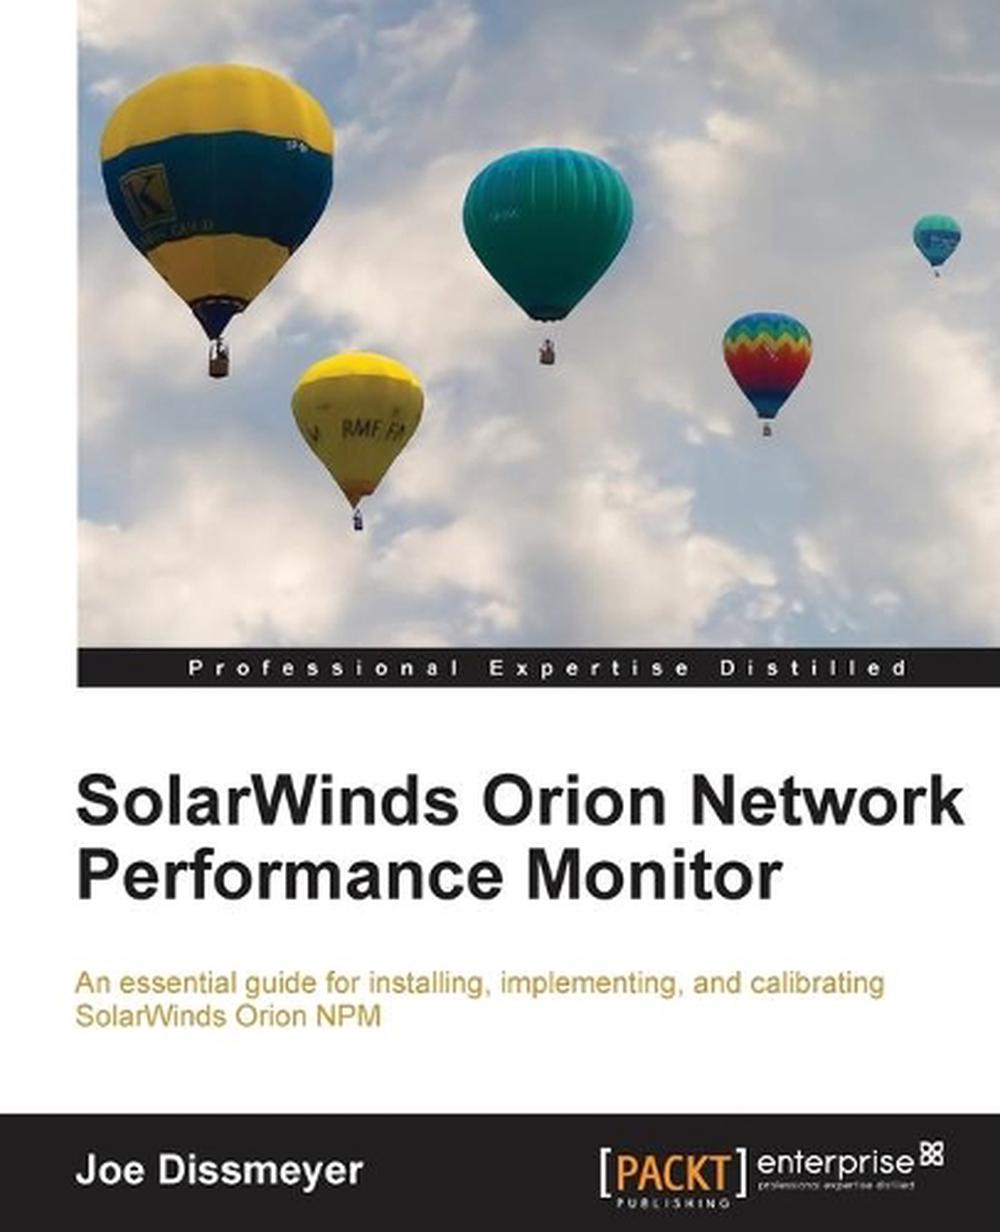 solarwinds network performance monitor requirements